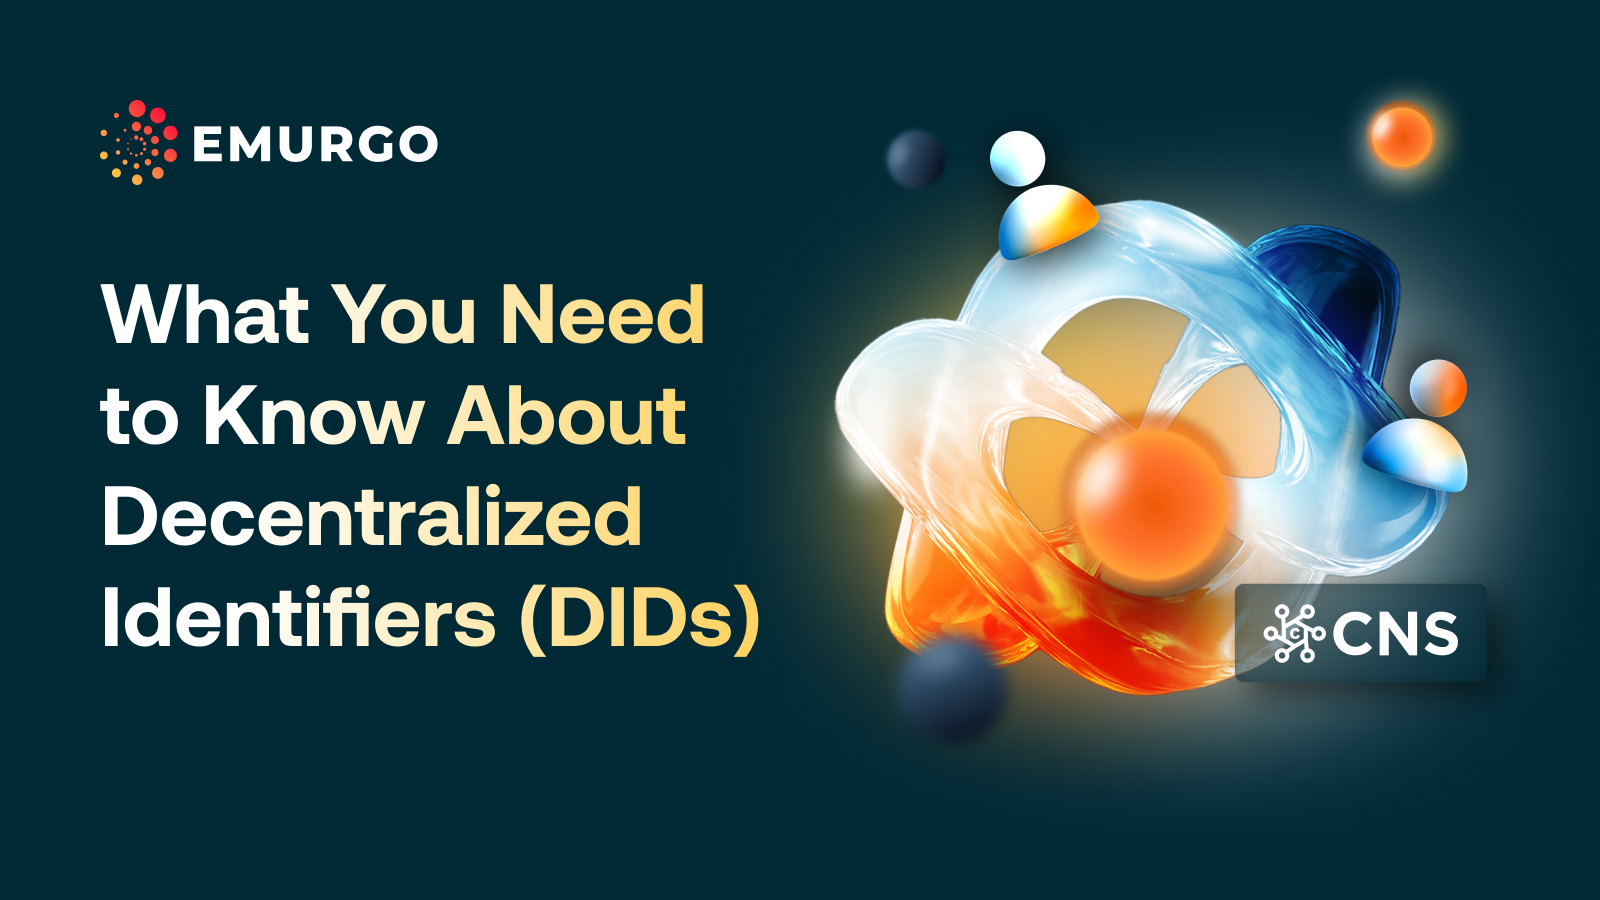 What-You-Need-to-Know-About-Decentralized-Identifiers-DIDs